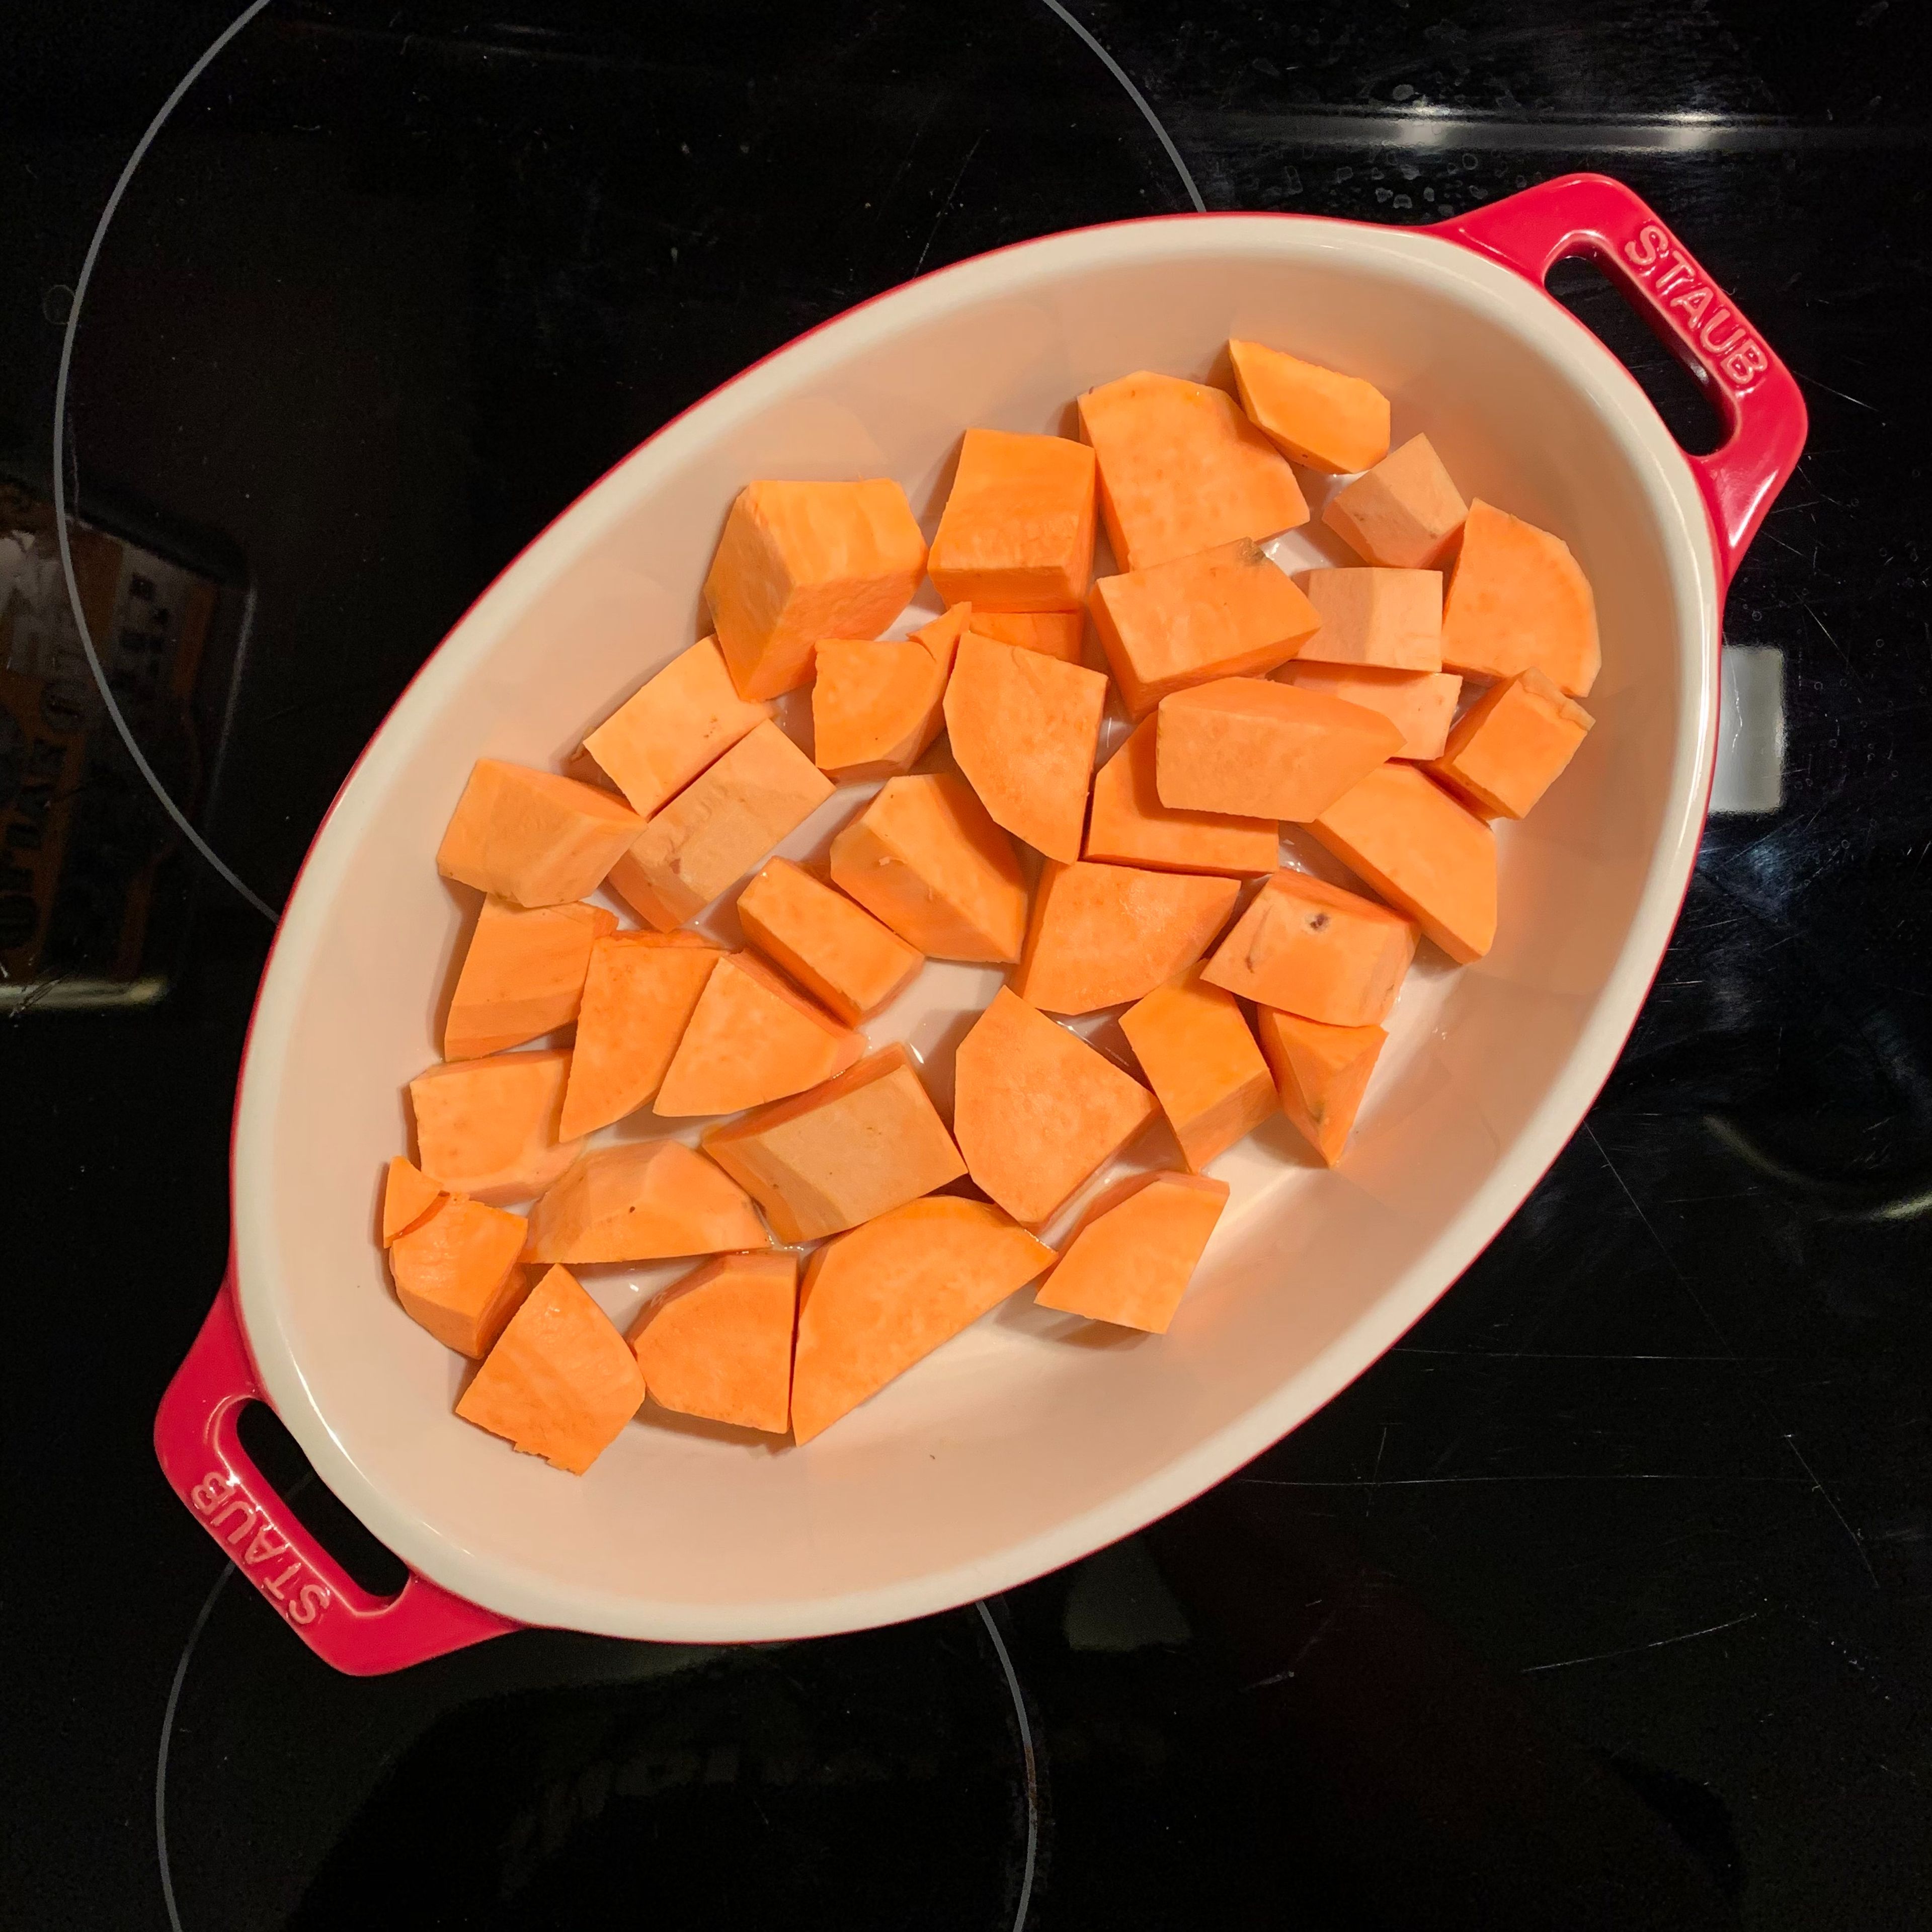 Cover bottom of the au gratin pan in olive oil. Peel sweet potatoes and cut them into pieces slightly larger than bite-sized. Place pieces in pan and cover in olive oil. Salt and pepper to taste.